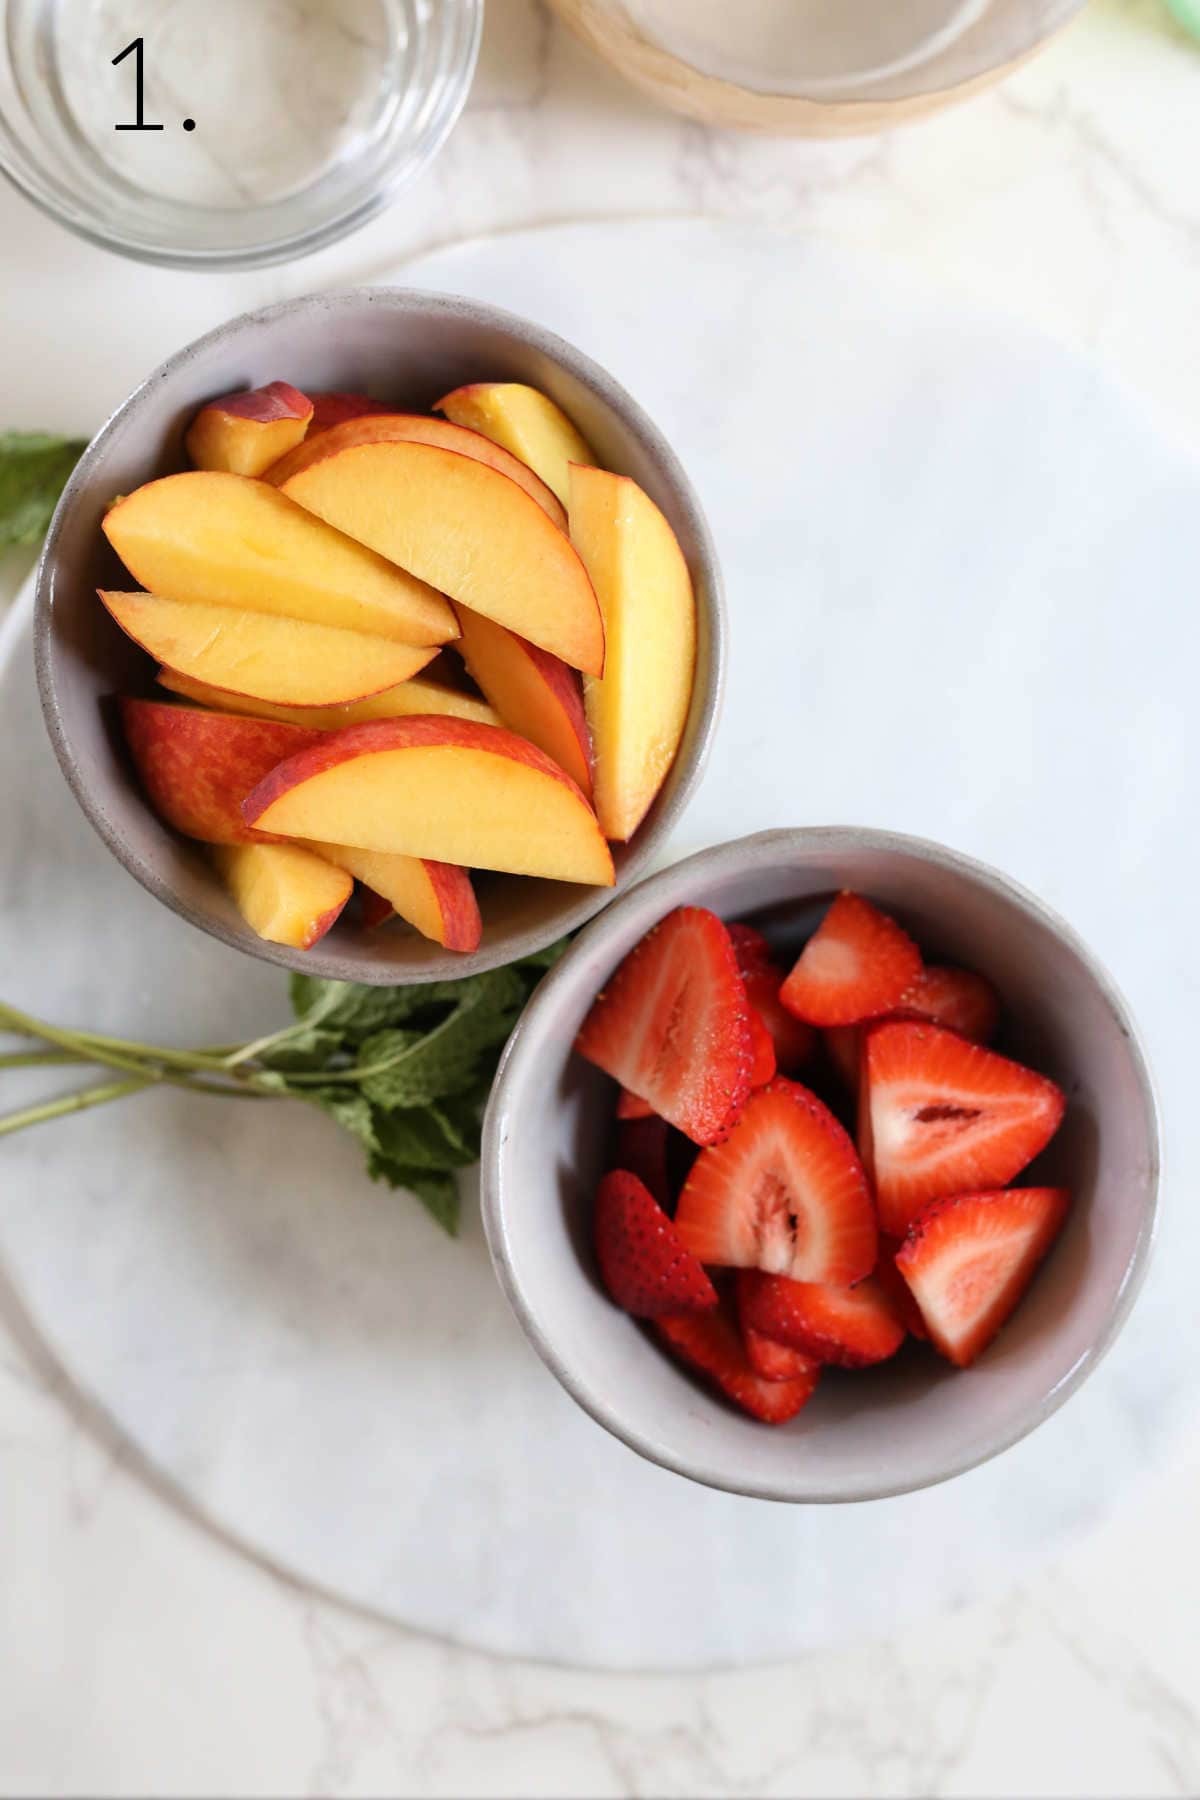 Sliced peaches and strawberries in bowls.